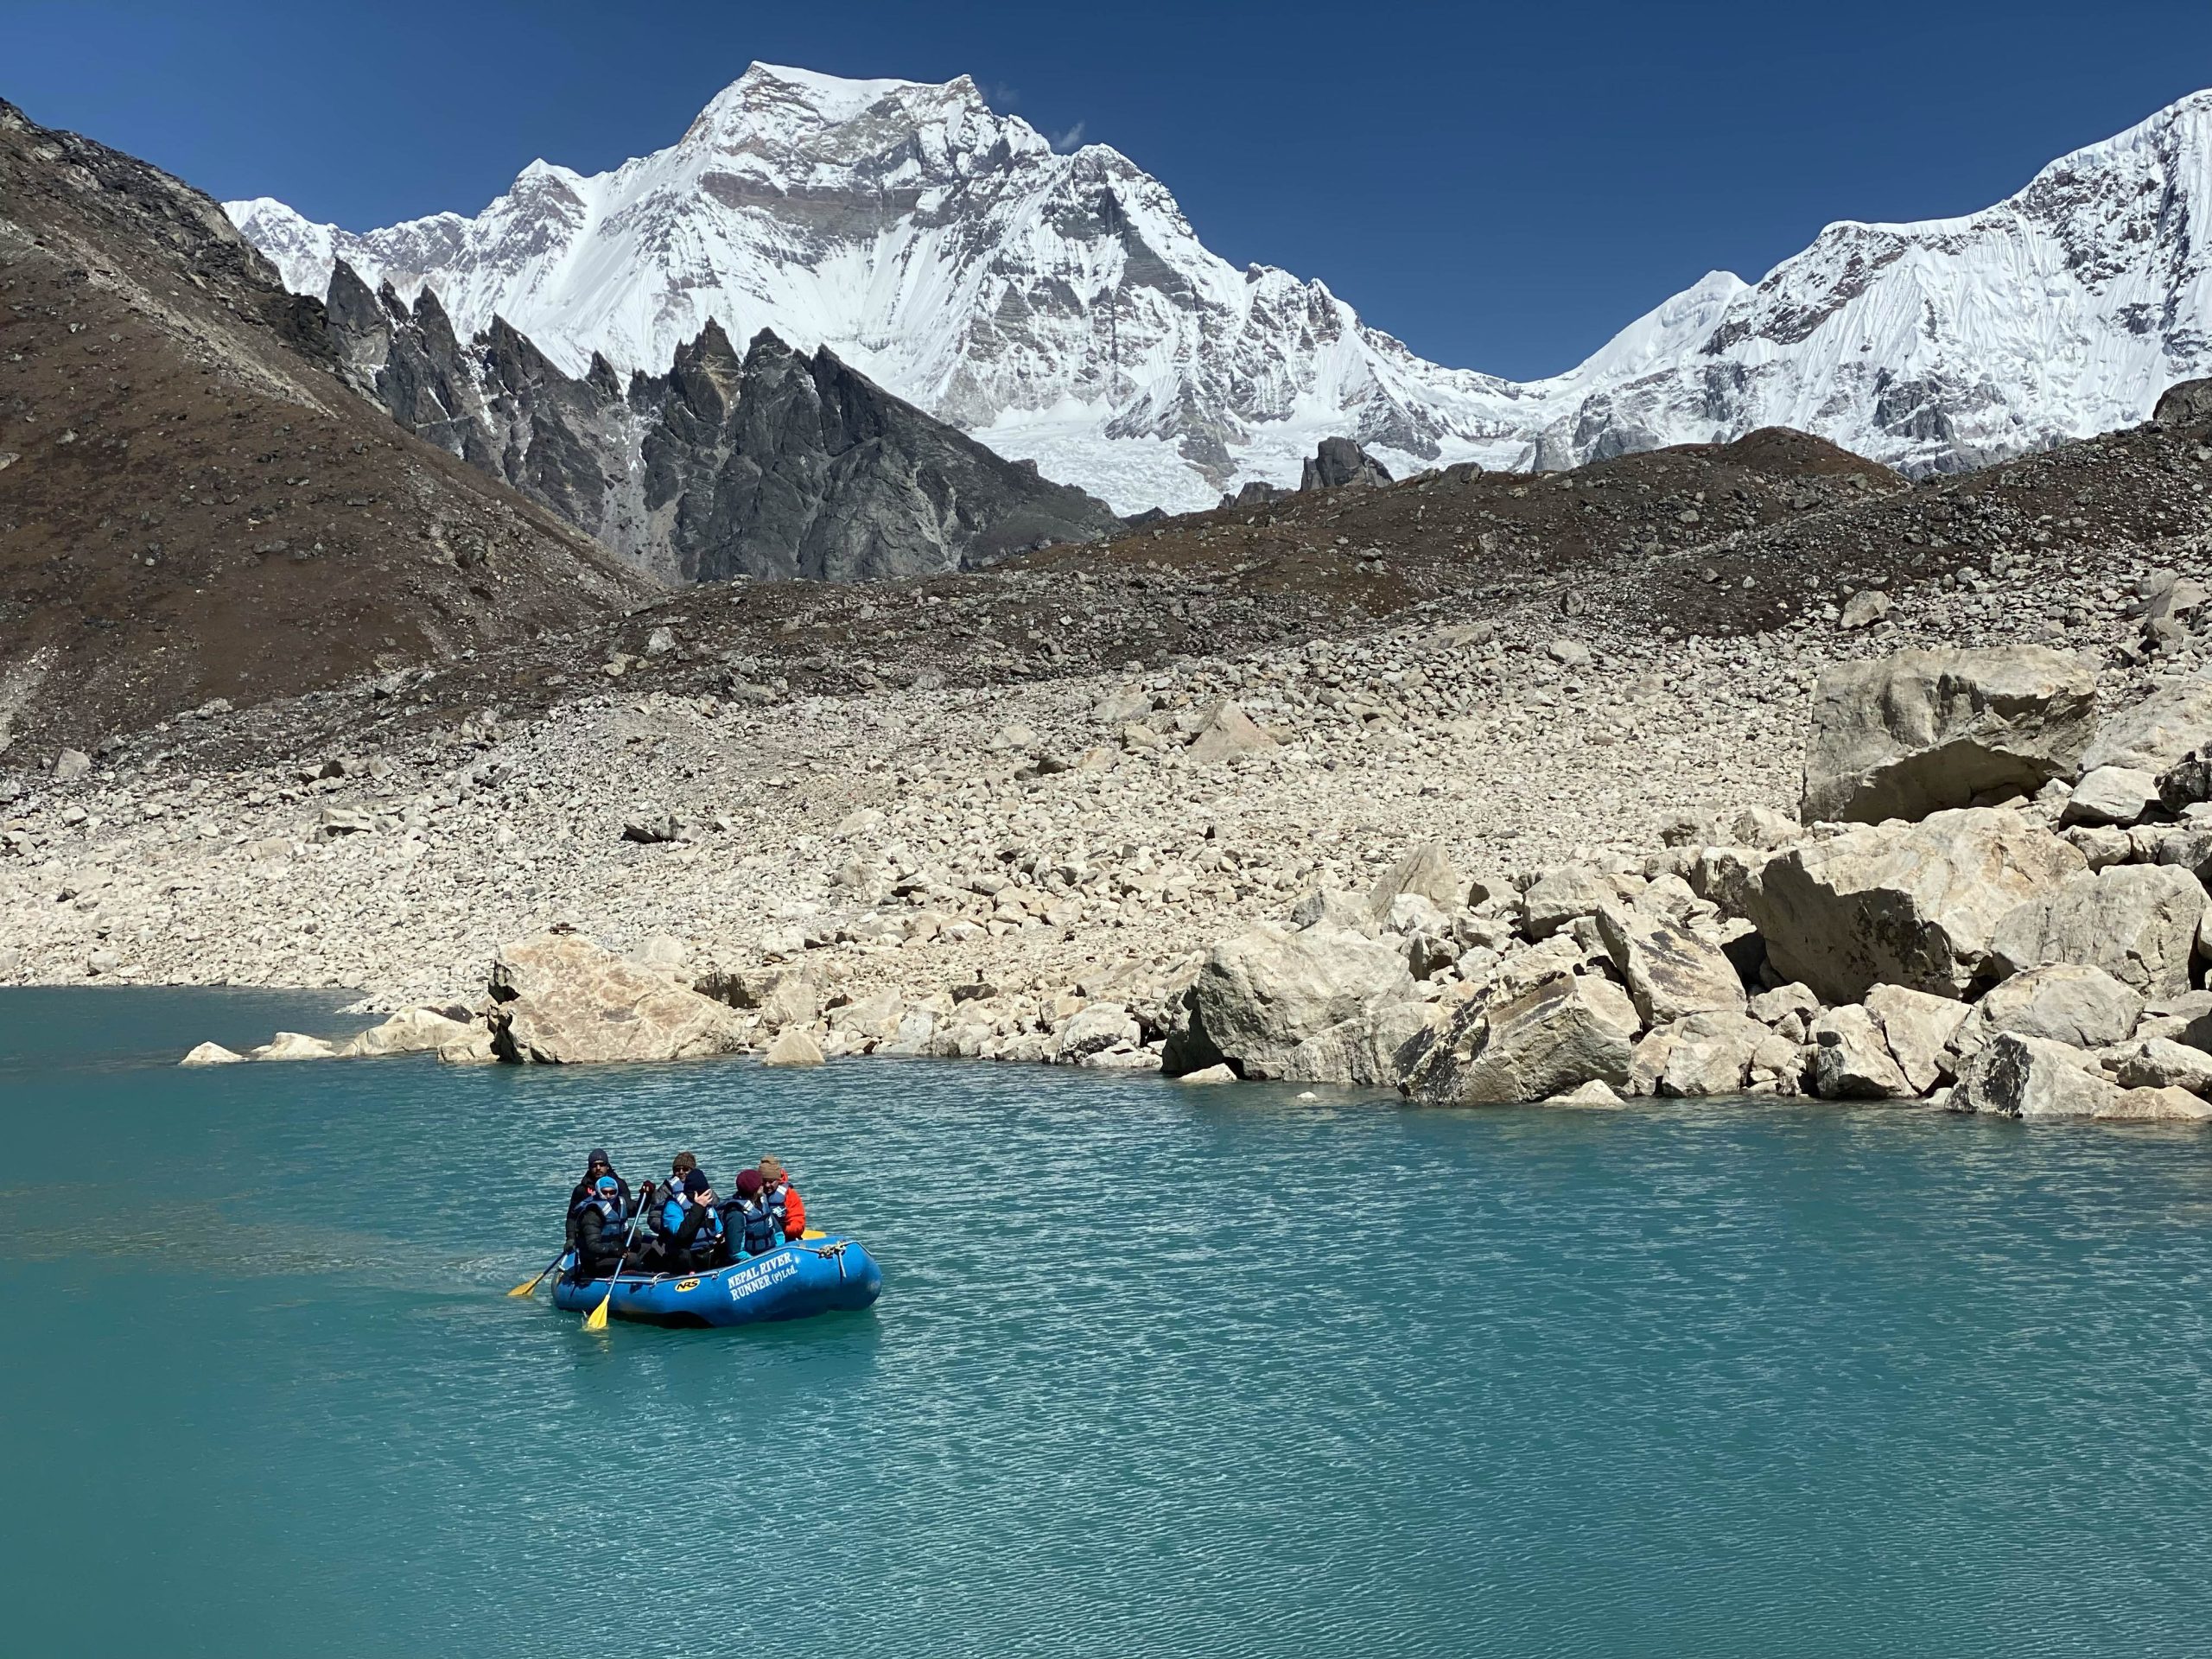 The researchers working on lake 5, a new lake they explored during the return trip. (photo by Roberto Camassa). Photo shows them on a raft in the middle of the beautiful blue lake.